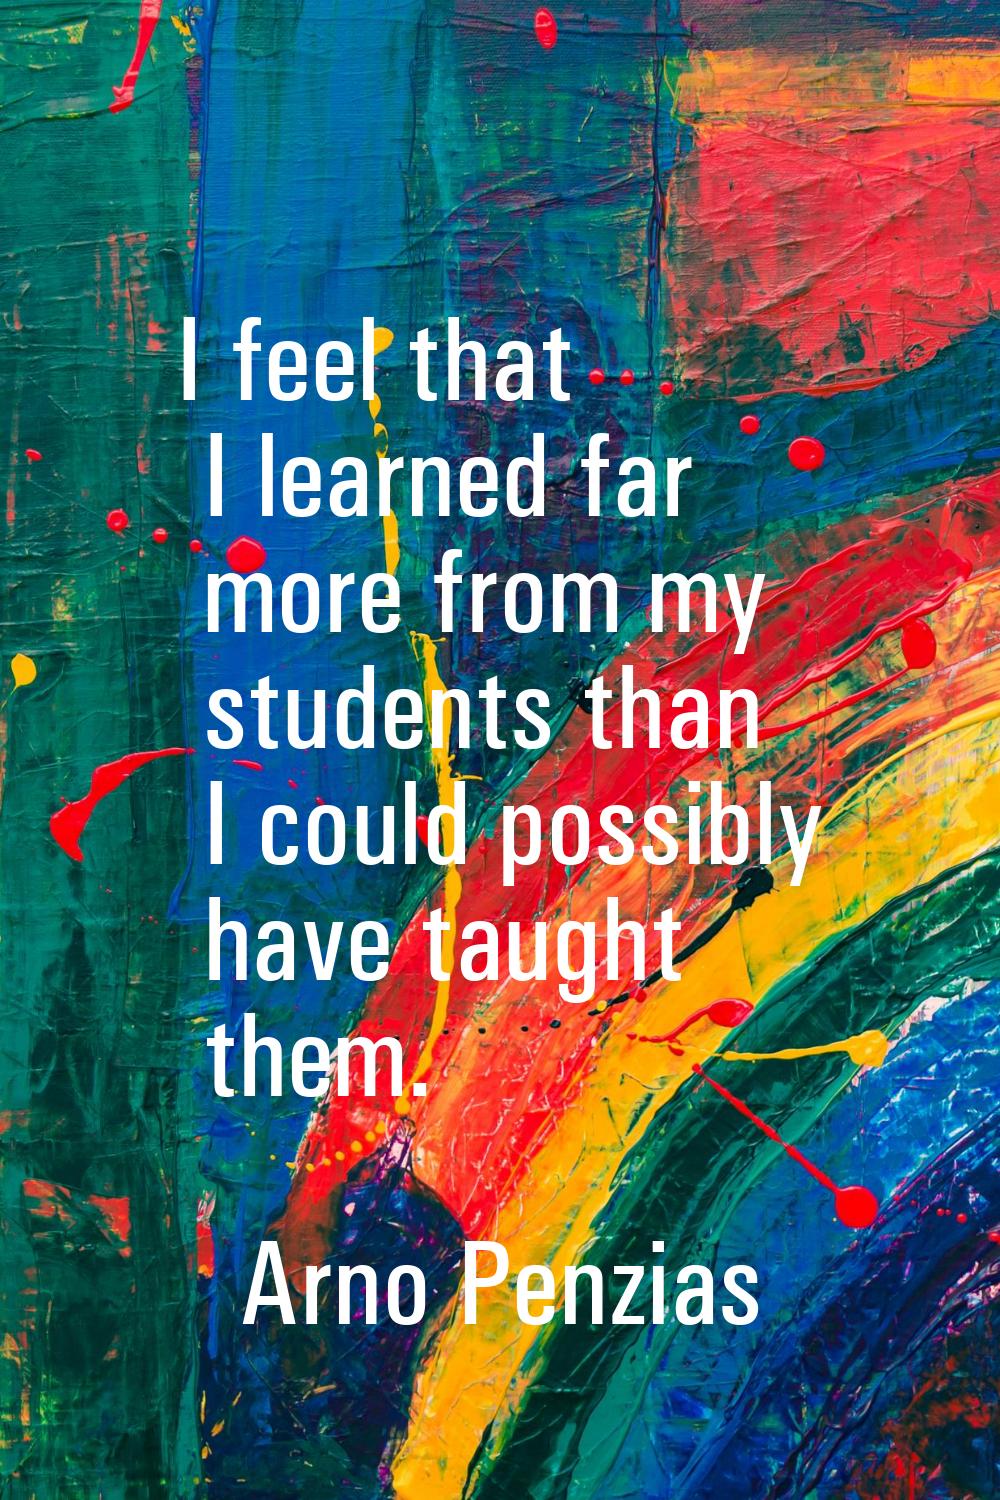 I feel that I learned far more from my students than I could possibly have taught them.